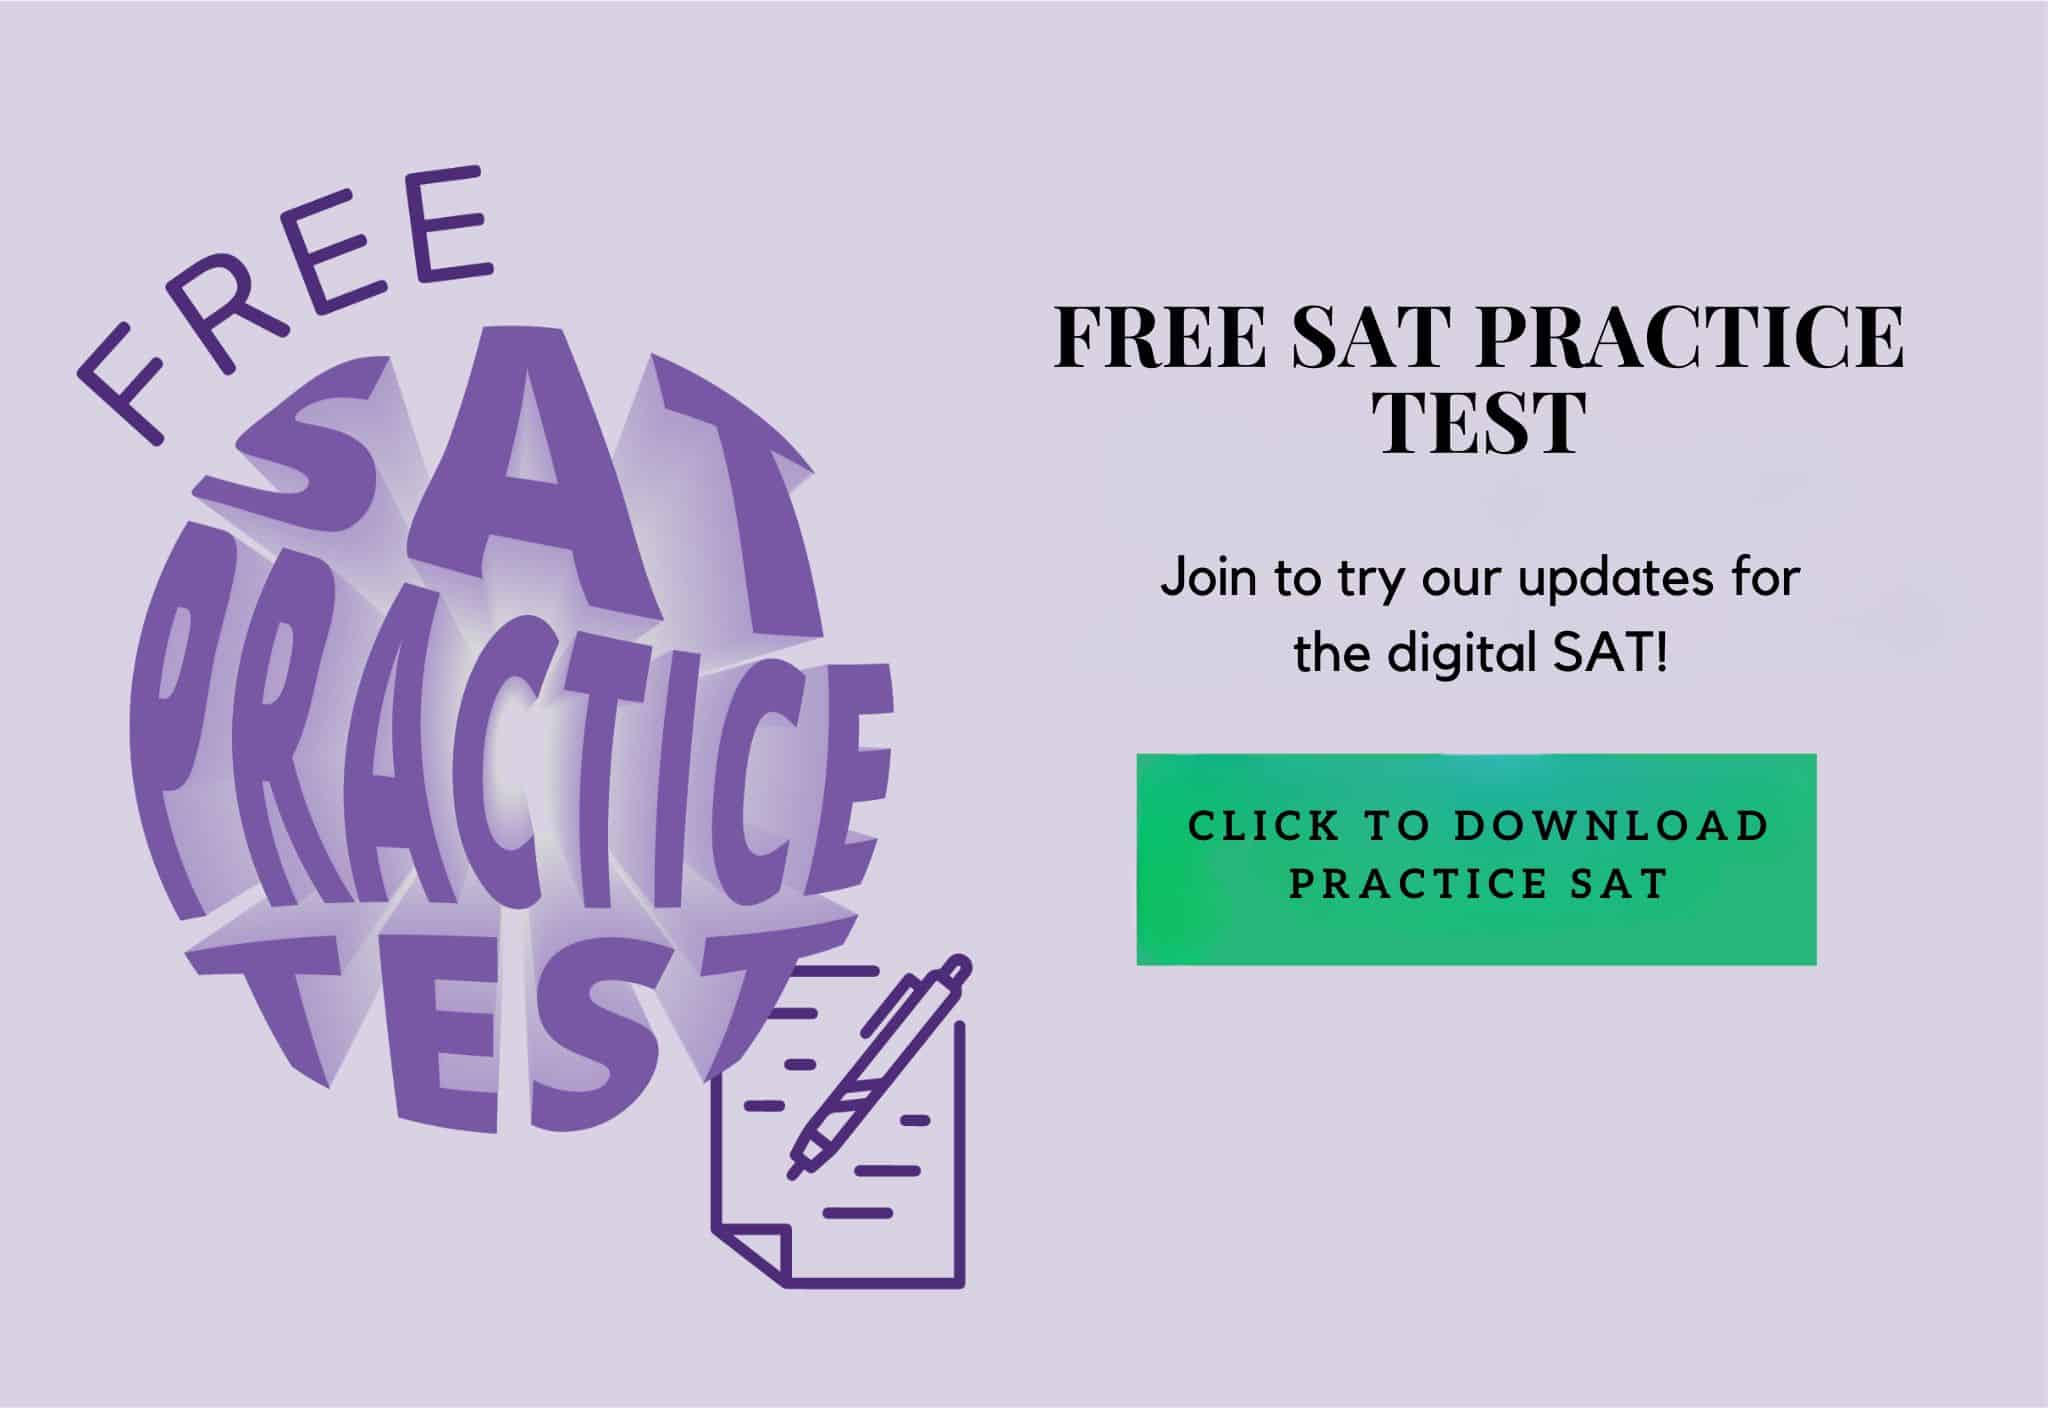 Here's a free SAT practice test--join to prep for digital.